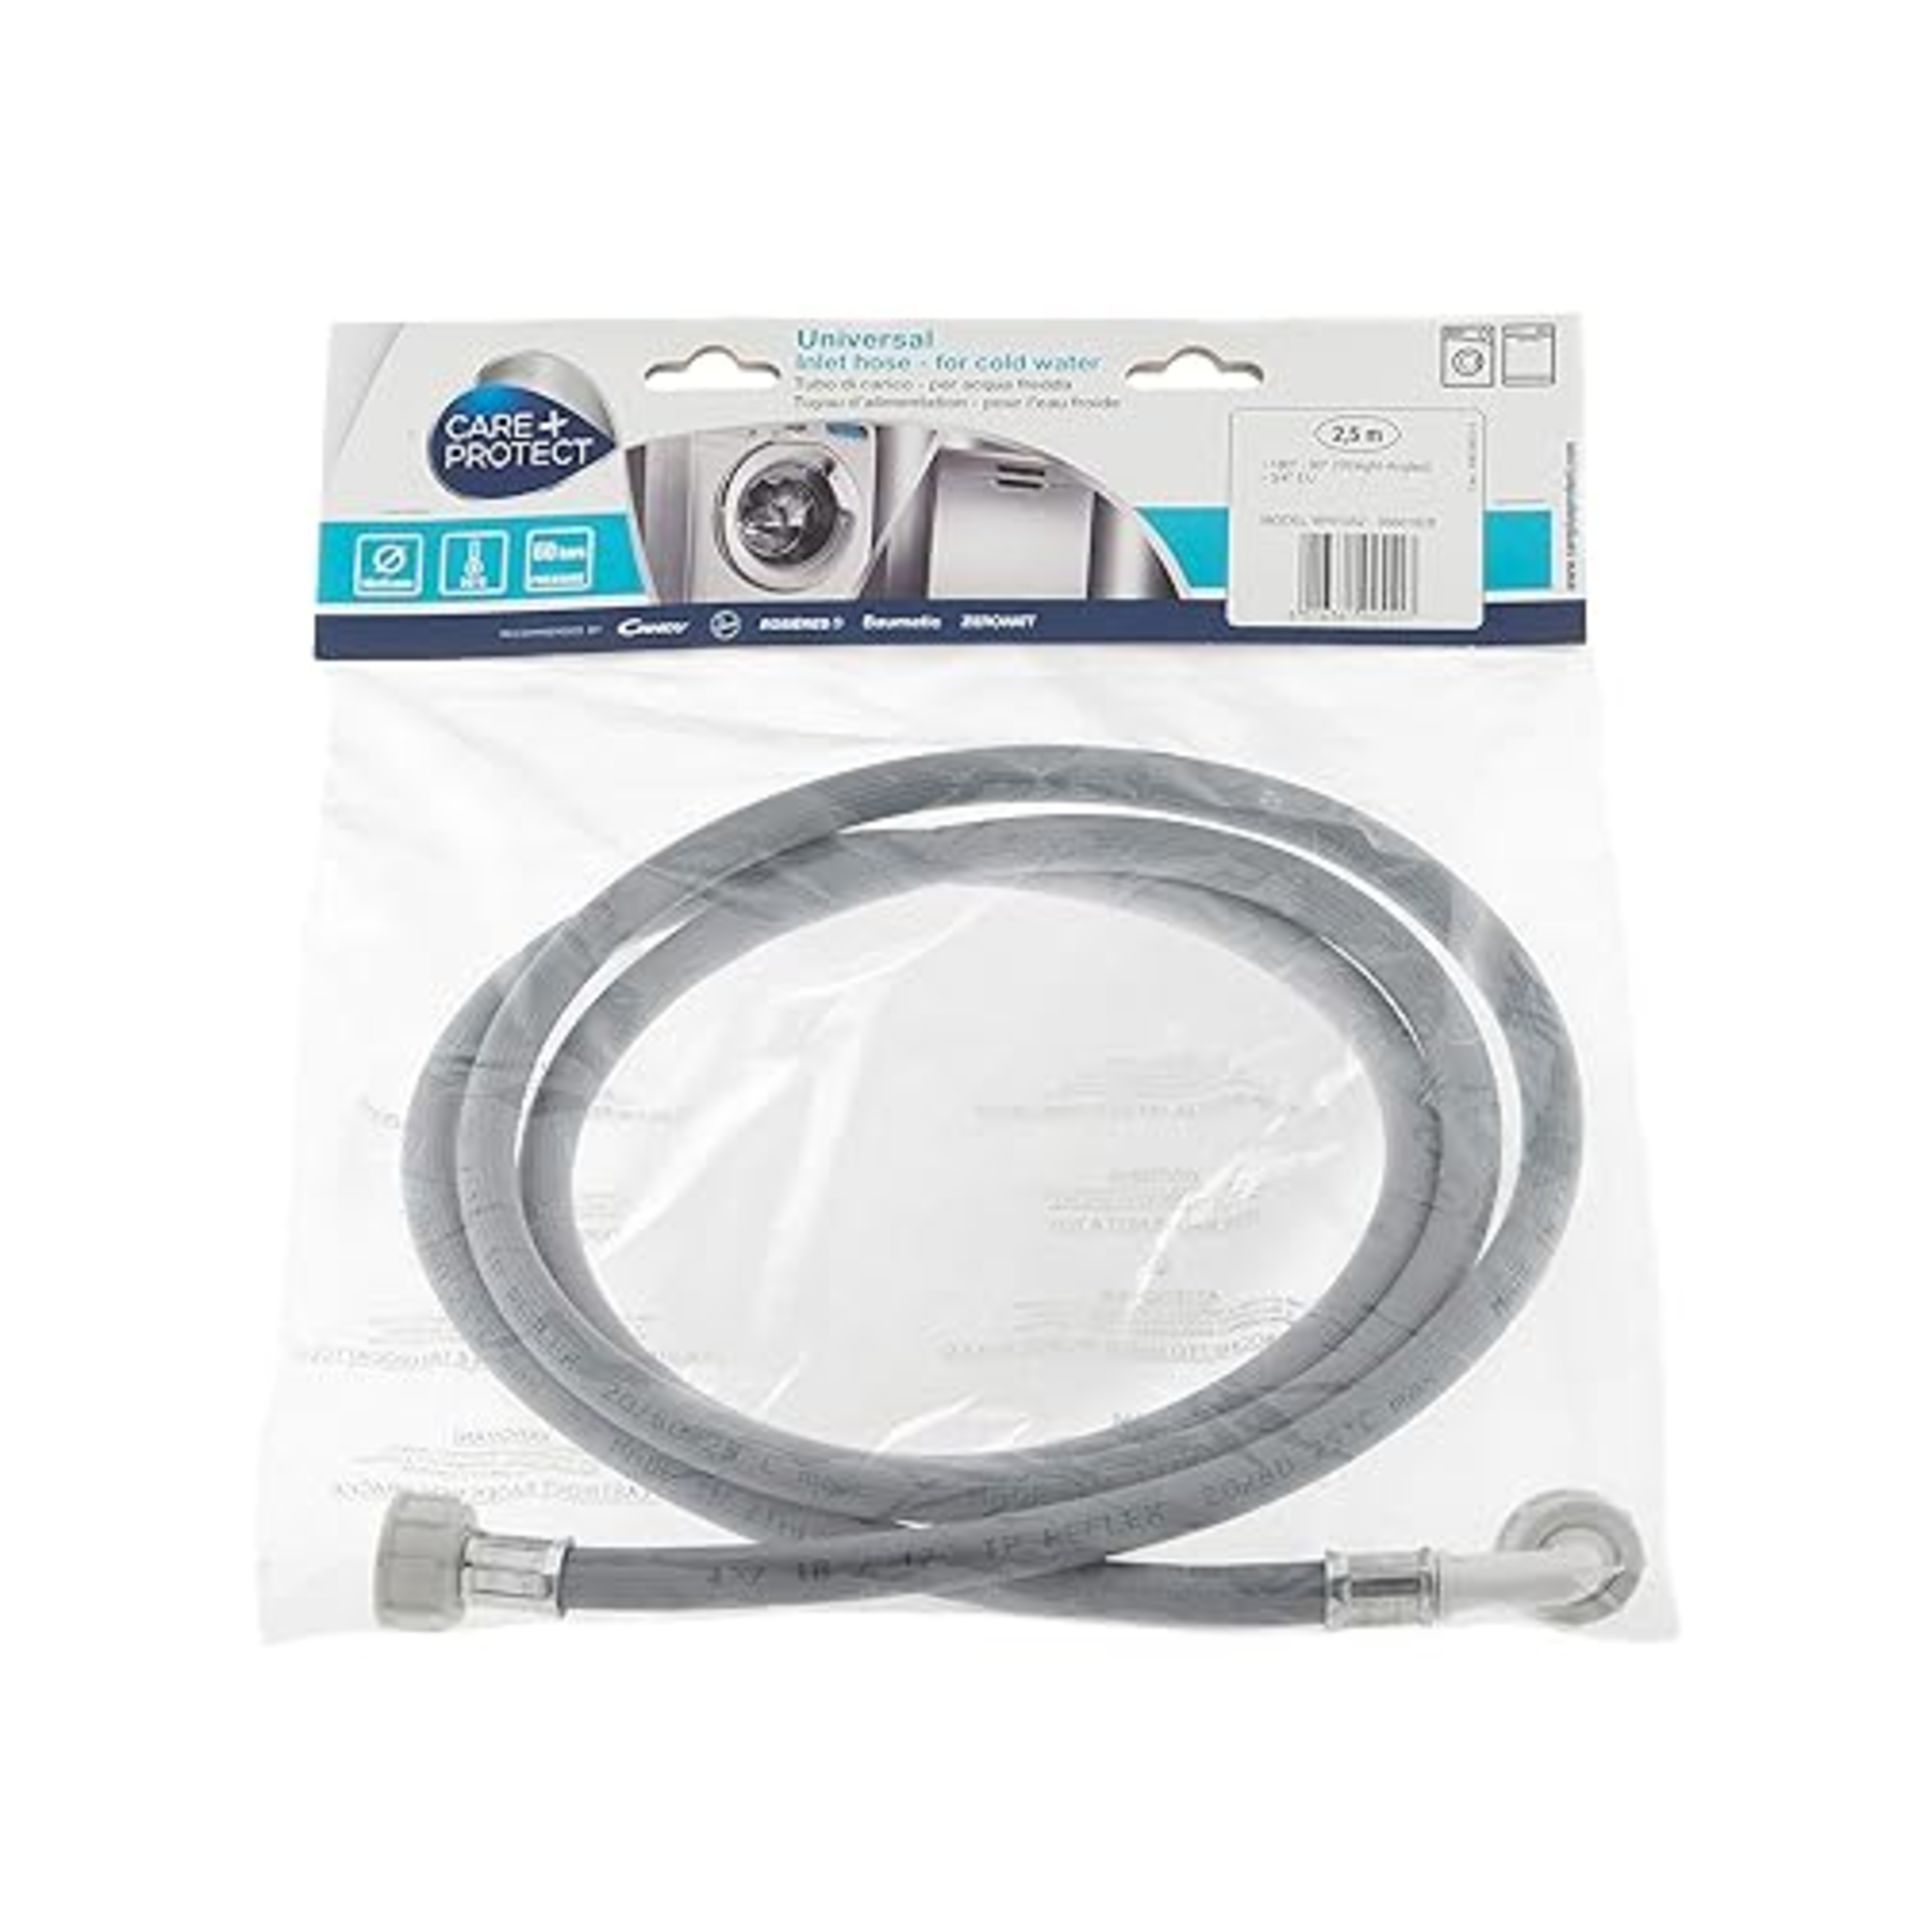 Care + Protect 35601828 Universal Cold Water Inlet Hose-Hose for Connection to Water Mains. Designe